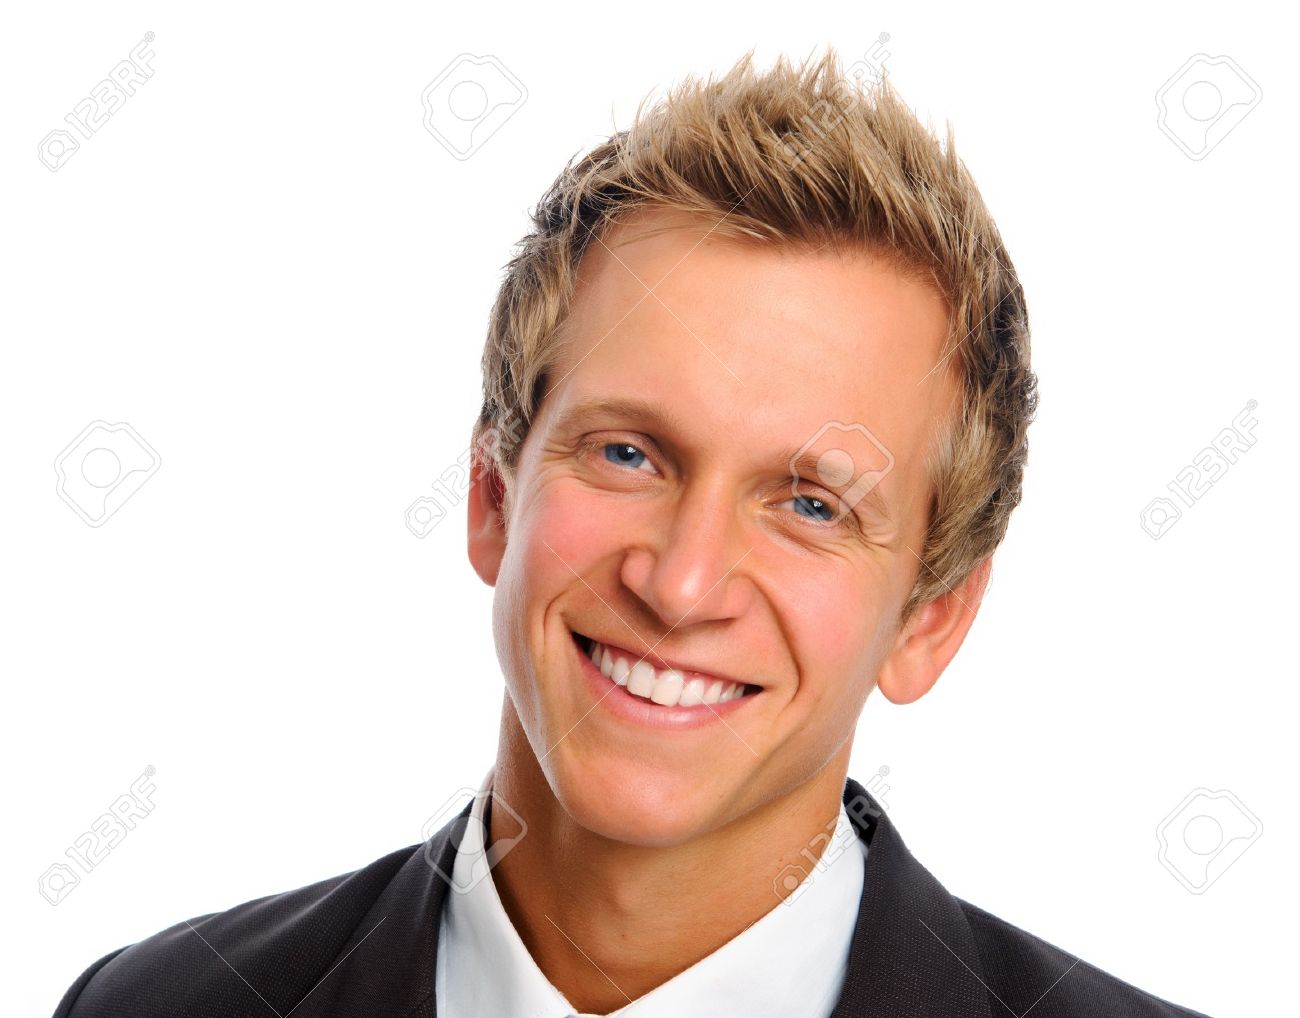 9967632-Happy-smiling-corporate-person-in-black-business-suit-isolated